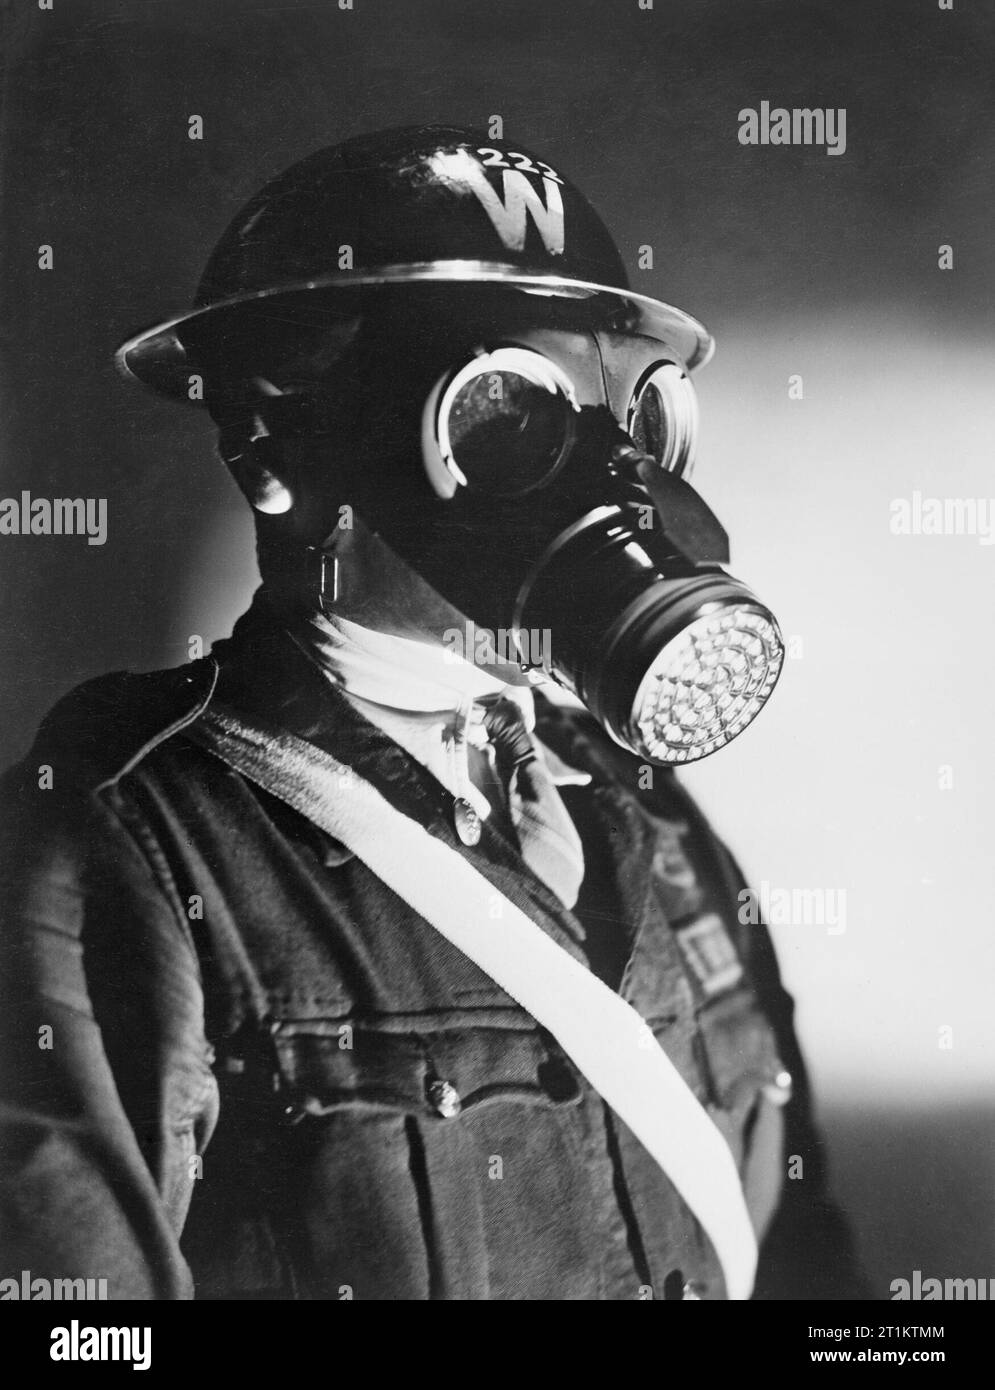 An Air Raid Warden wearing his steel helmet and duty gas mask during the Second World War. A head and shoulders portrait of an Air Raid Warden wearing his steel helmet and duty gas mask. The steel helmet has a large white 'W' painted on it, indicating that the wearer is an ARP Warden. The warden also wears a white sash, probably to make him more visible in the blackout. Stock Photo